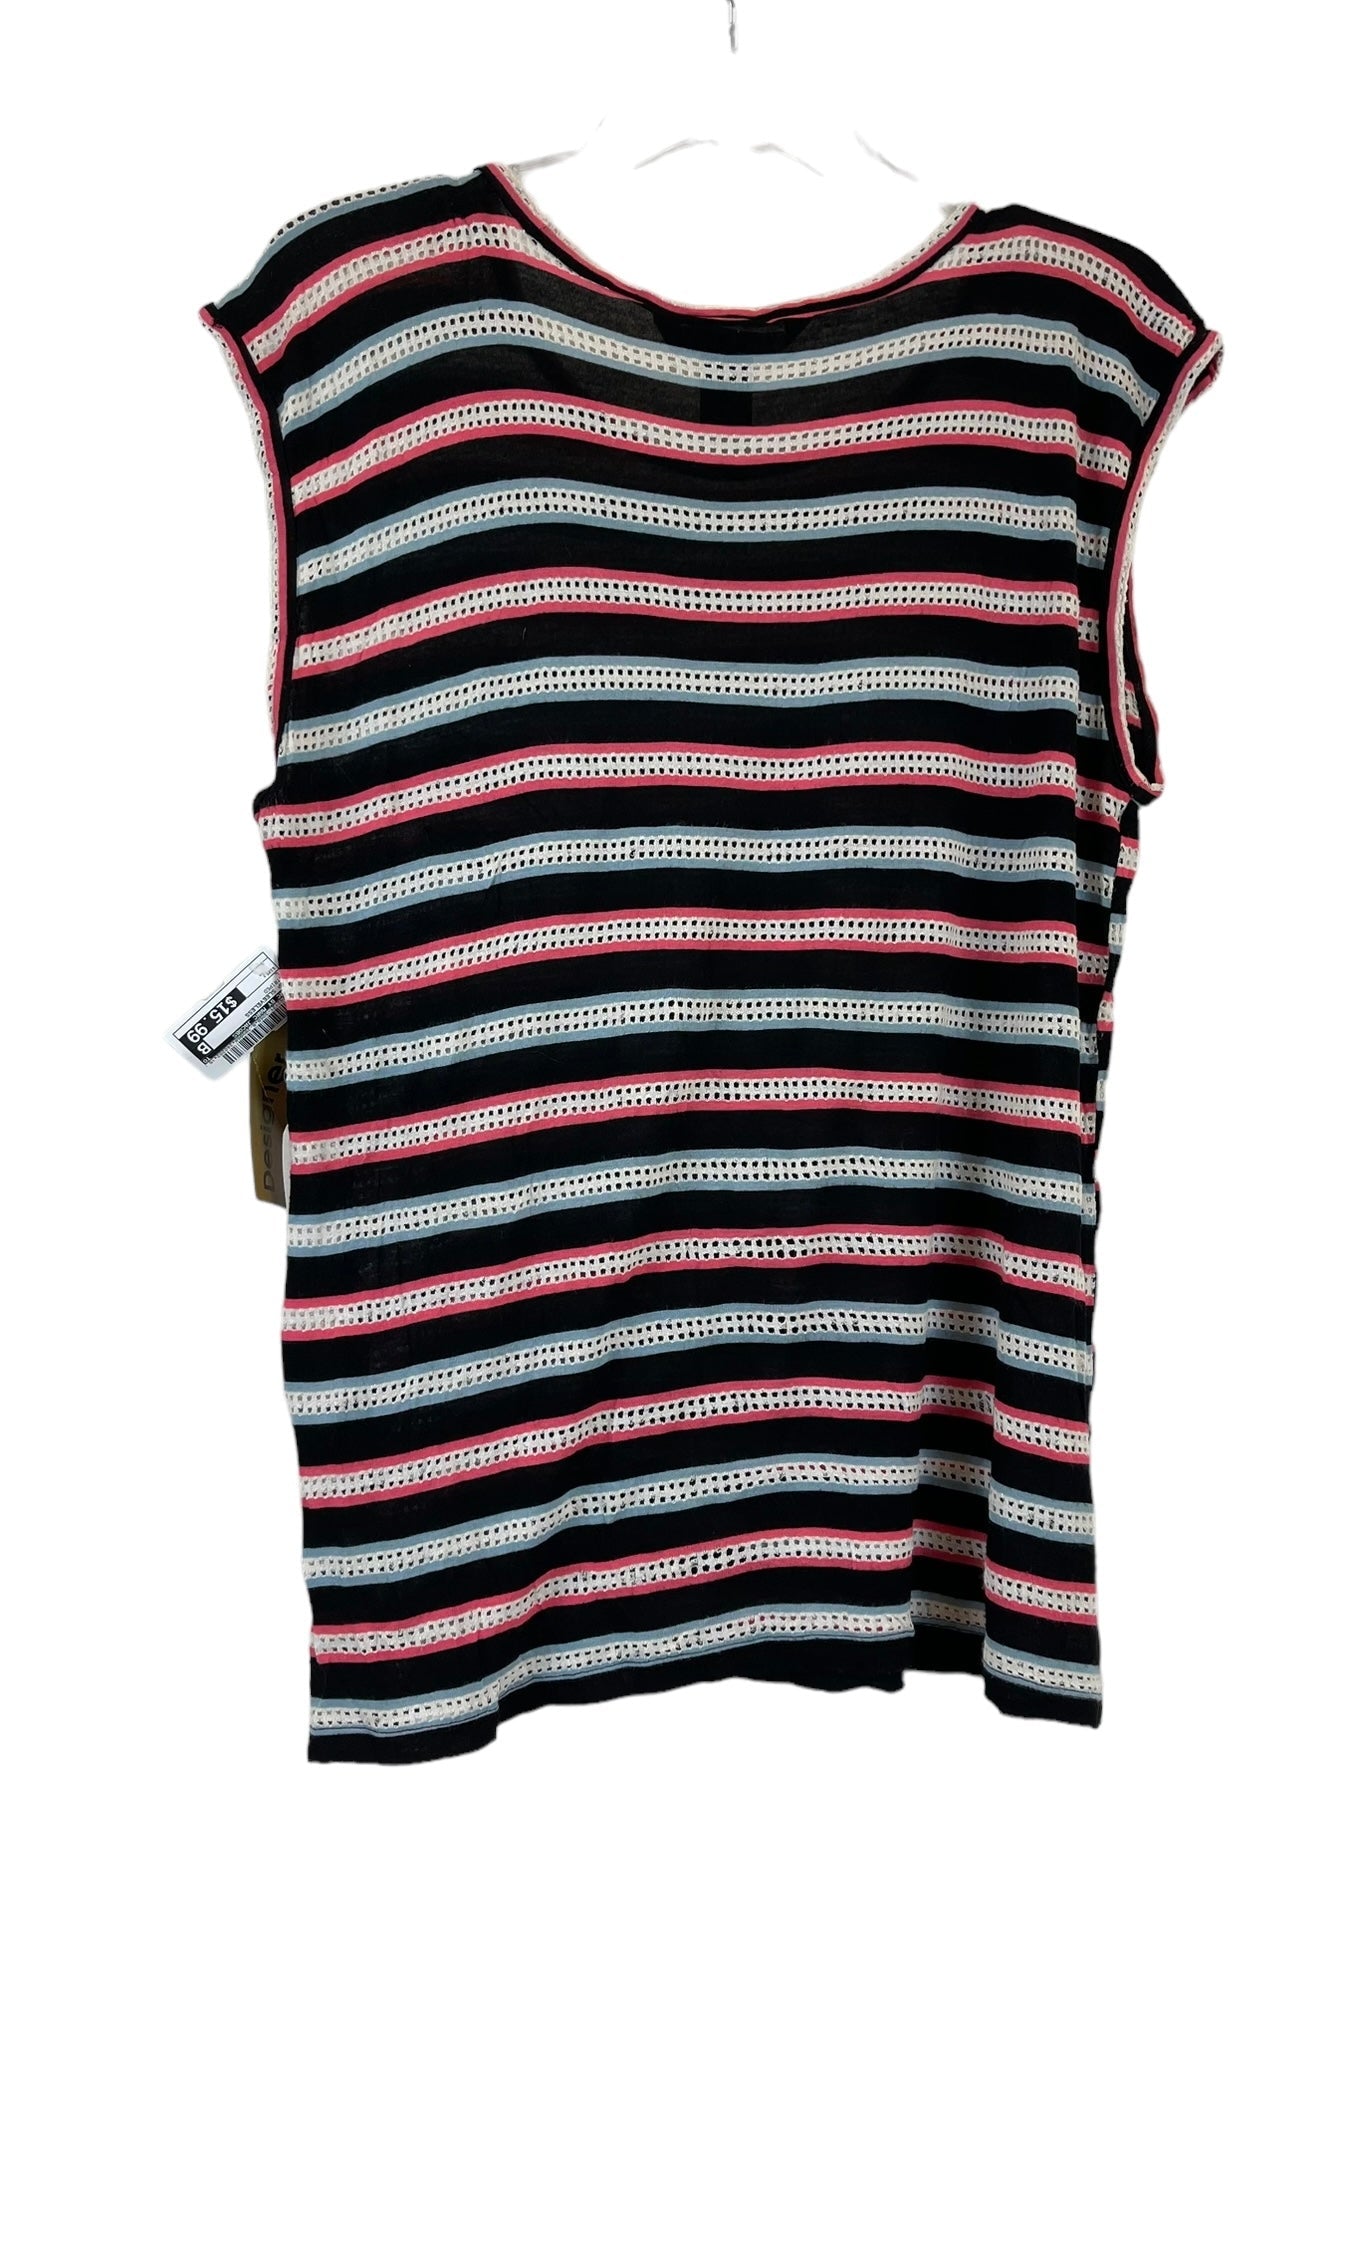 Top Sleeveless By Marc By Marc Jacobs  Size: L